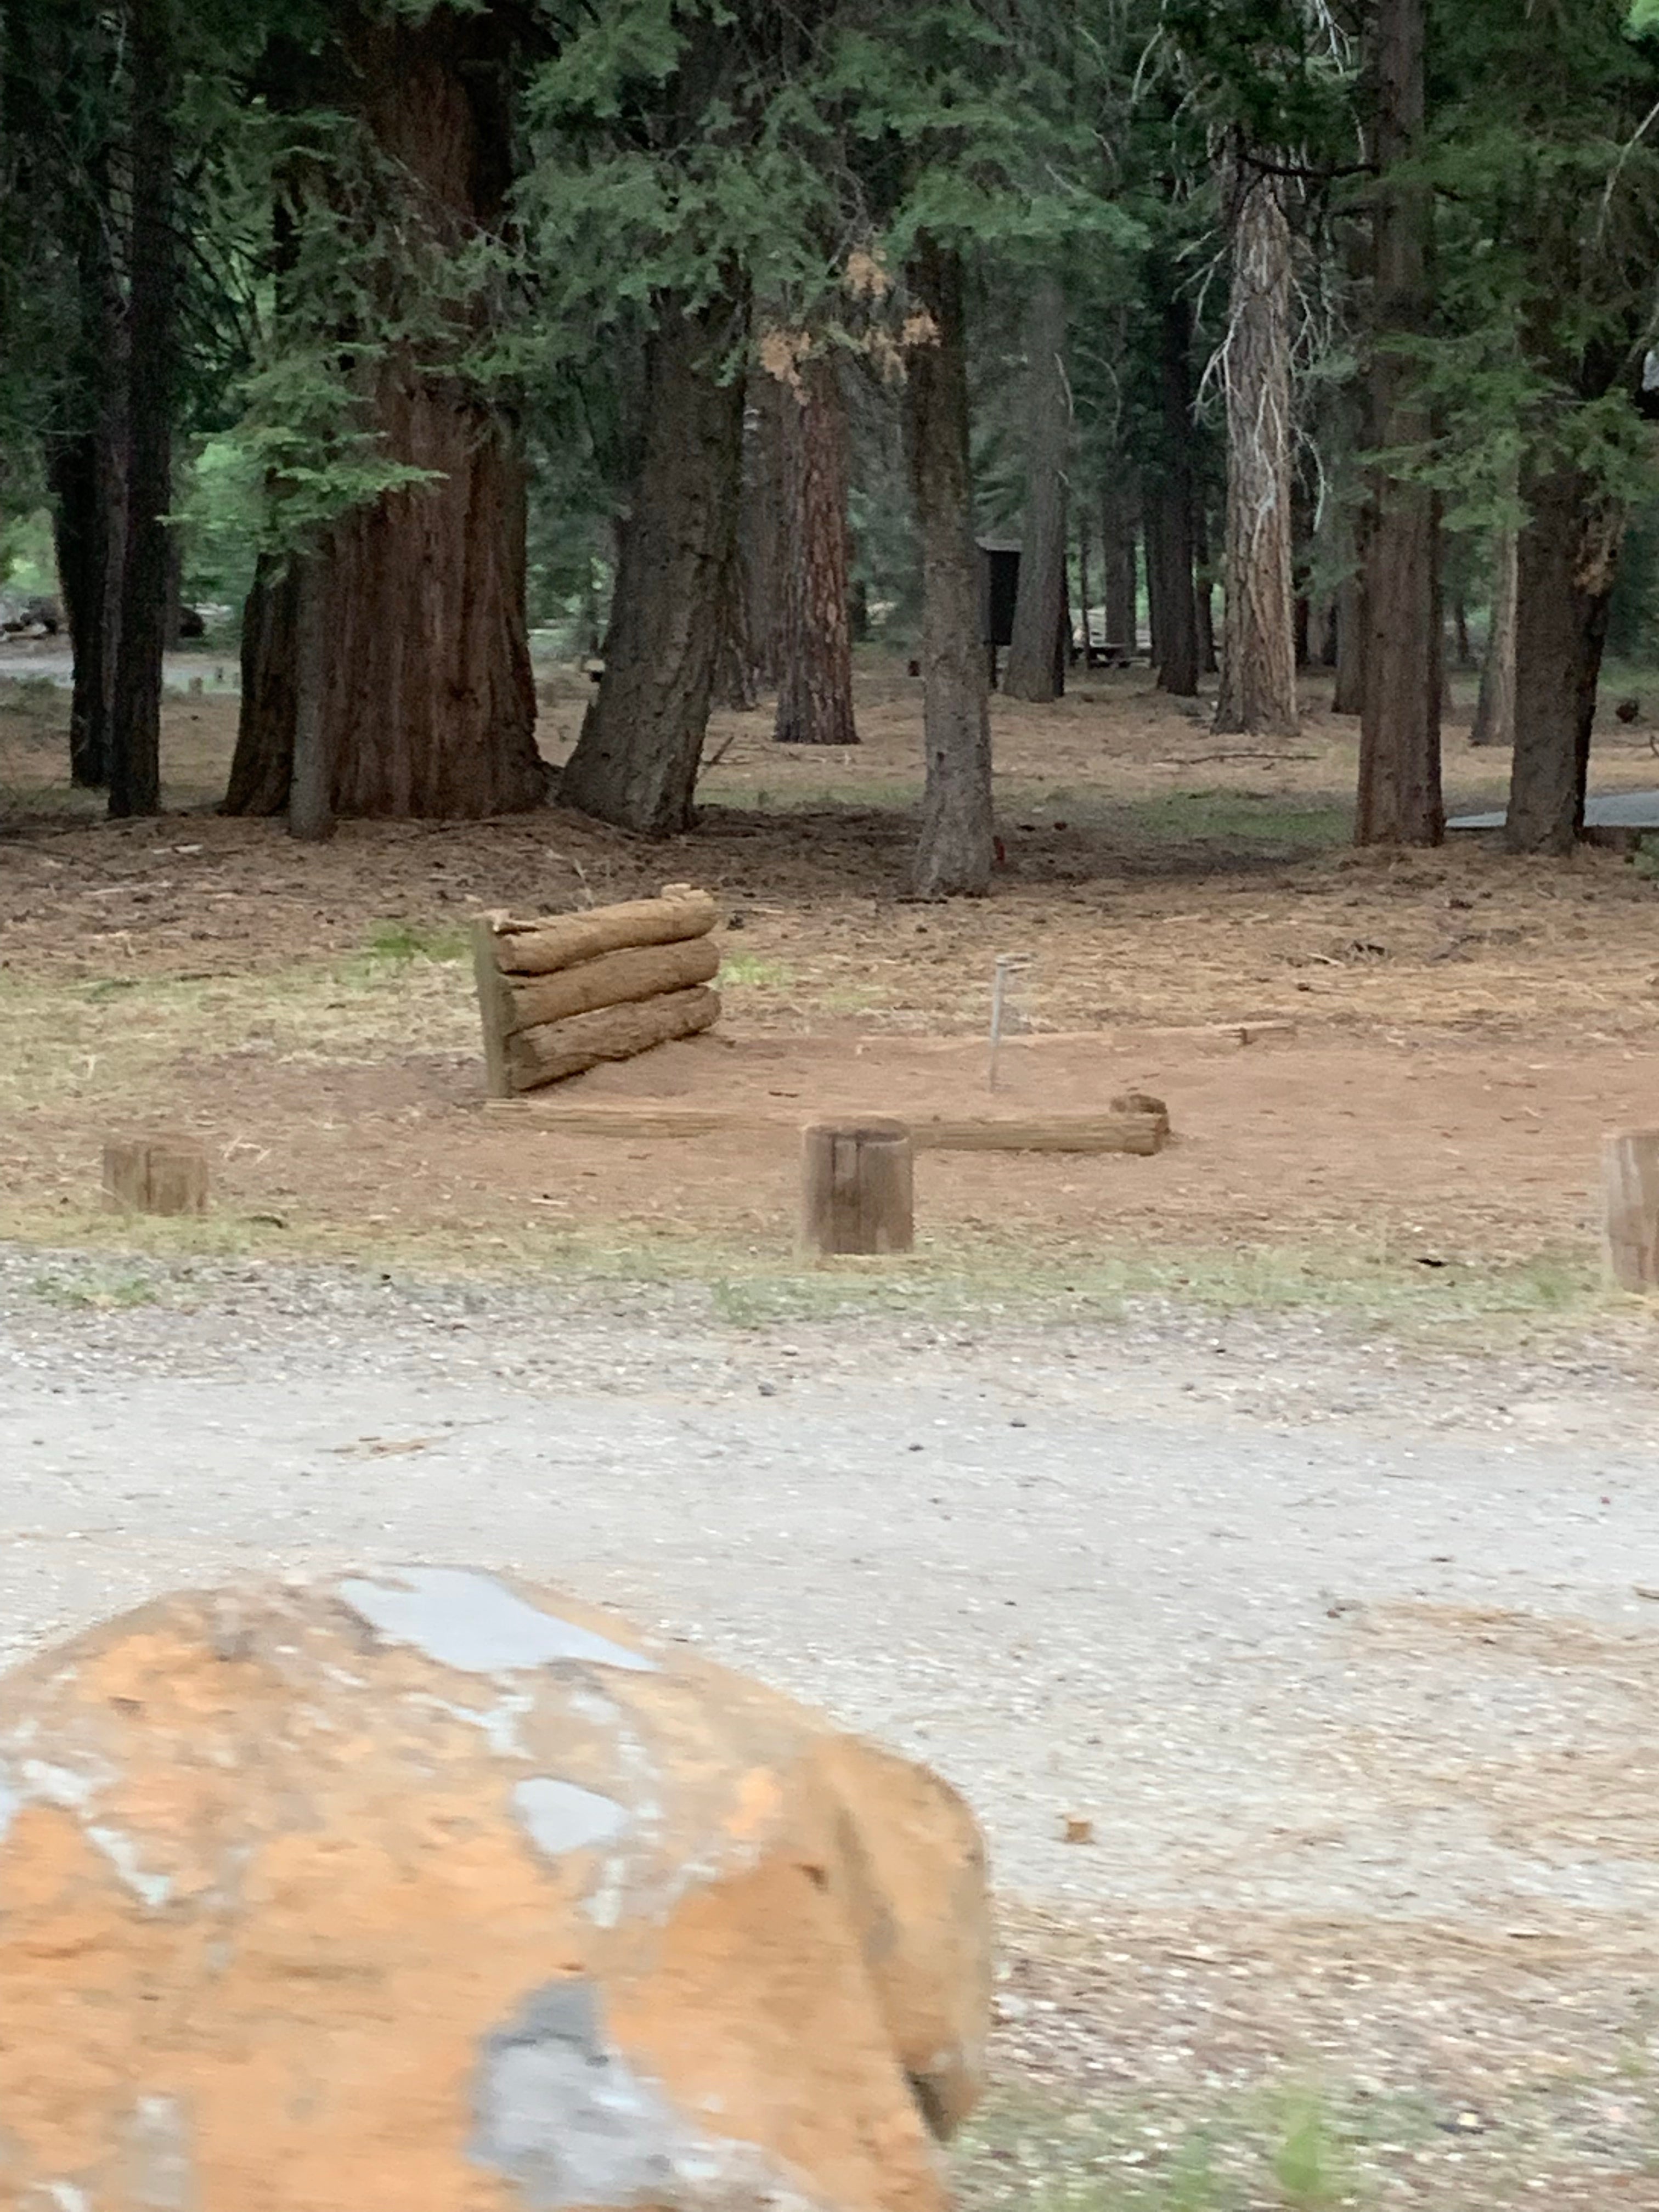 Camper submitted image from PG&E Lake Almanor Area Last Chance Creek Campground - 2